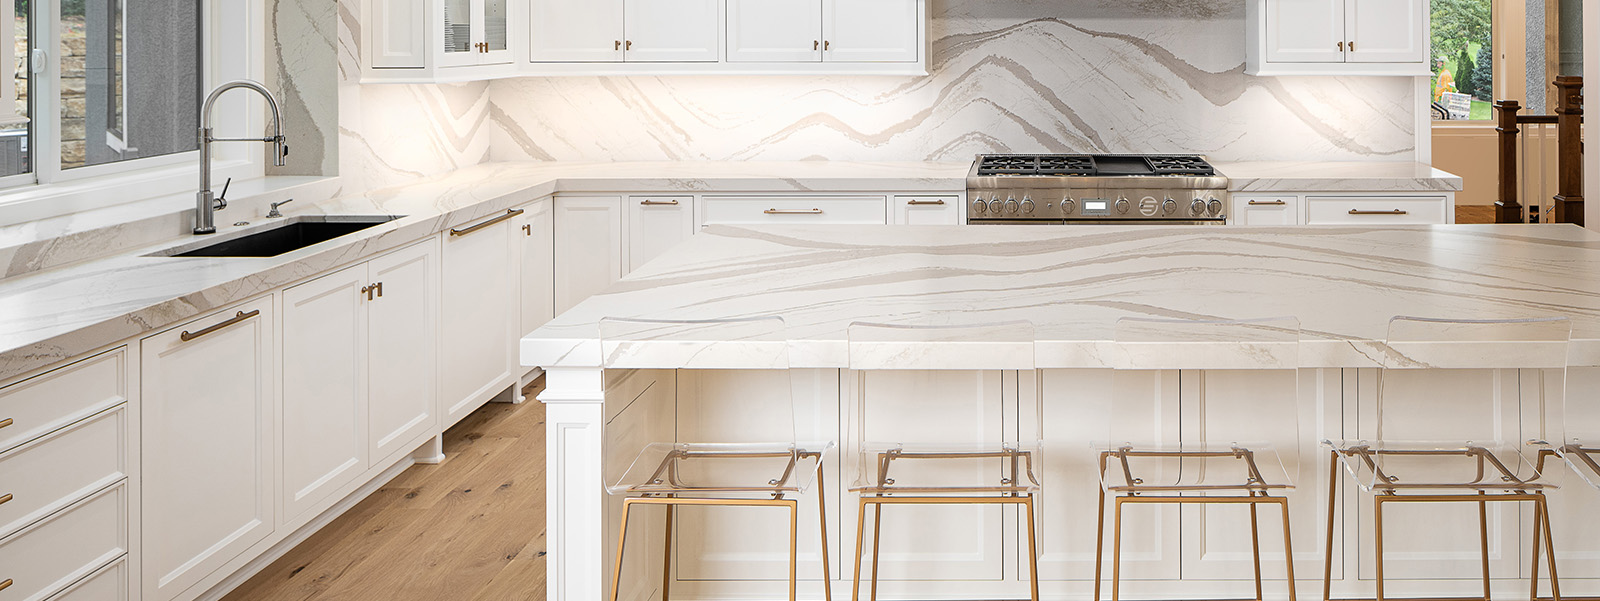 Countertops And The Truth About Seams, How To Avoid Seams In Granite Countertops